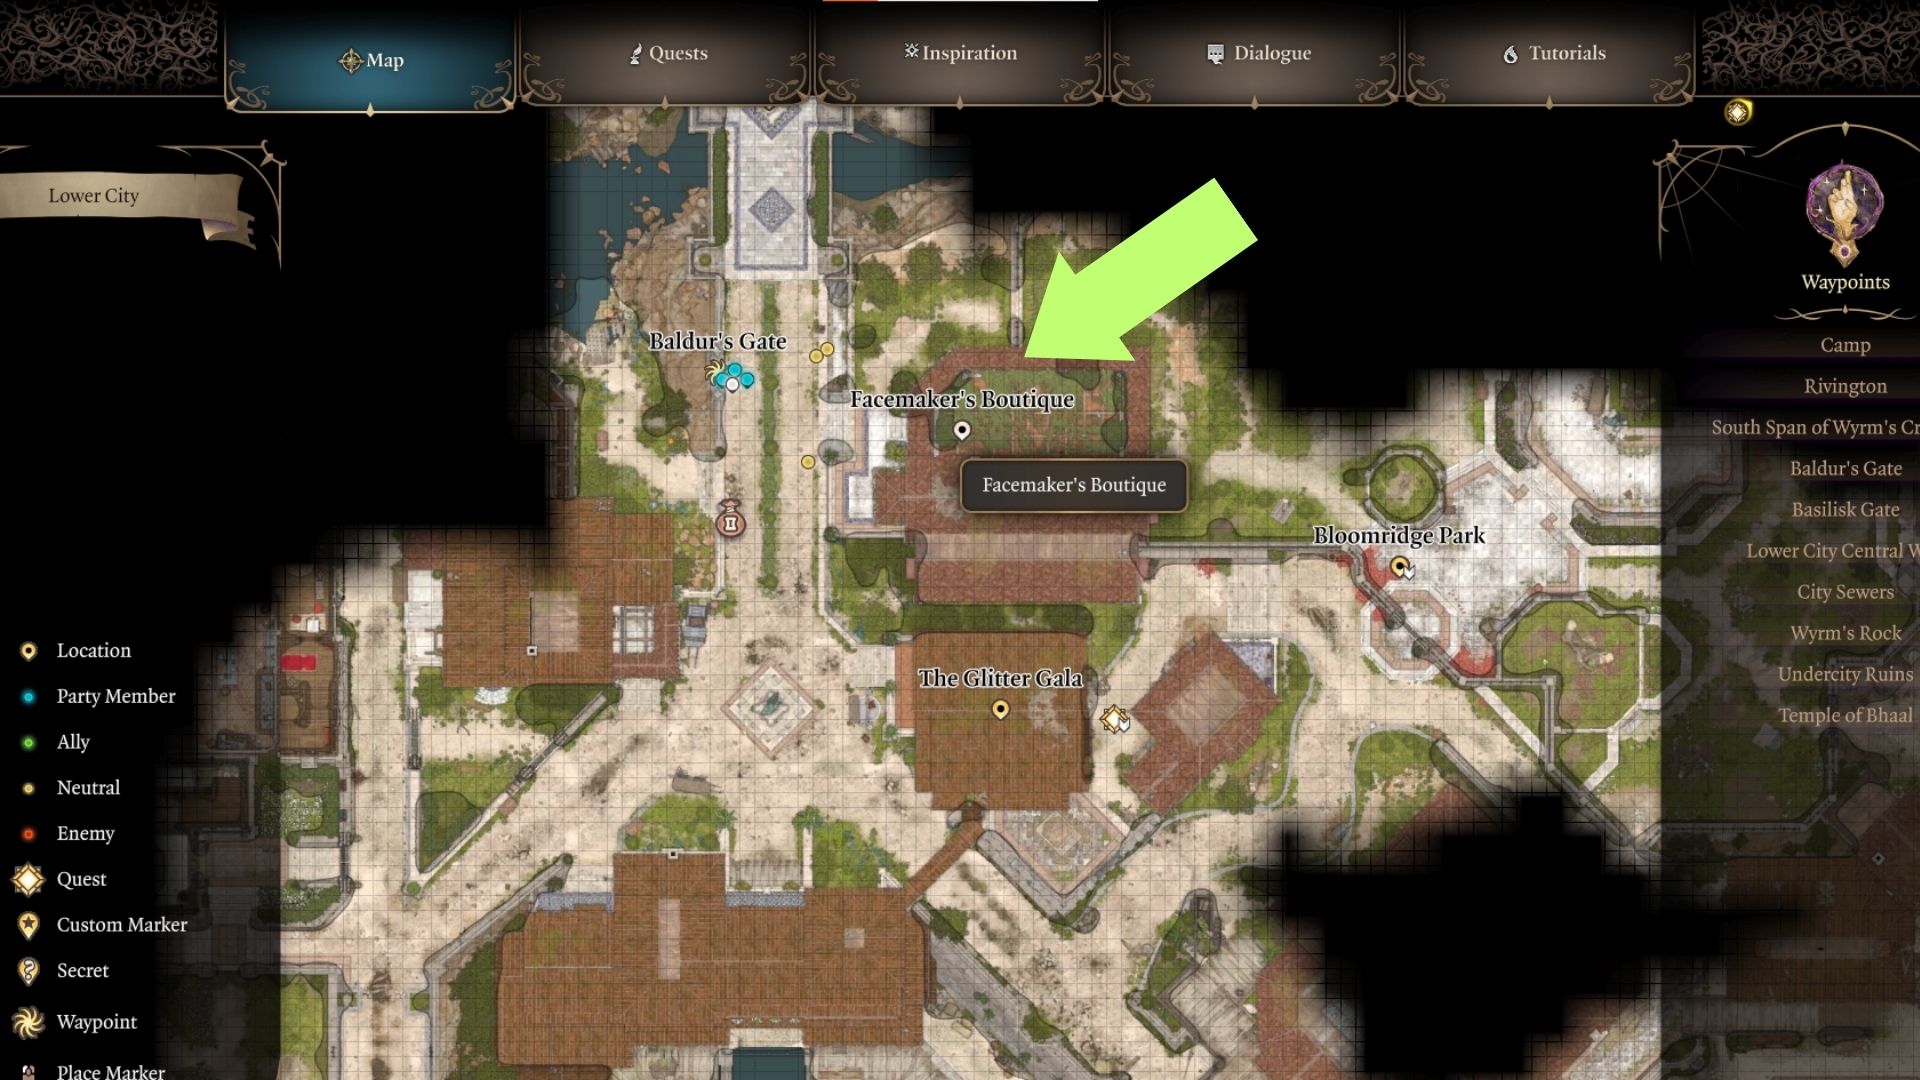 A screenshot of Facemaker Boutique's location on the map in Baldur's Gate 3. 